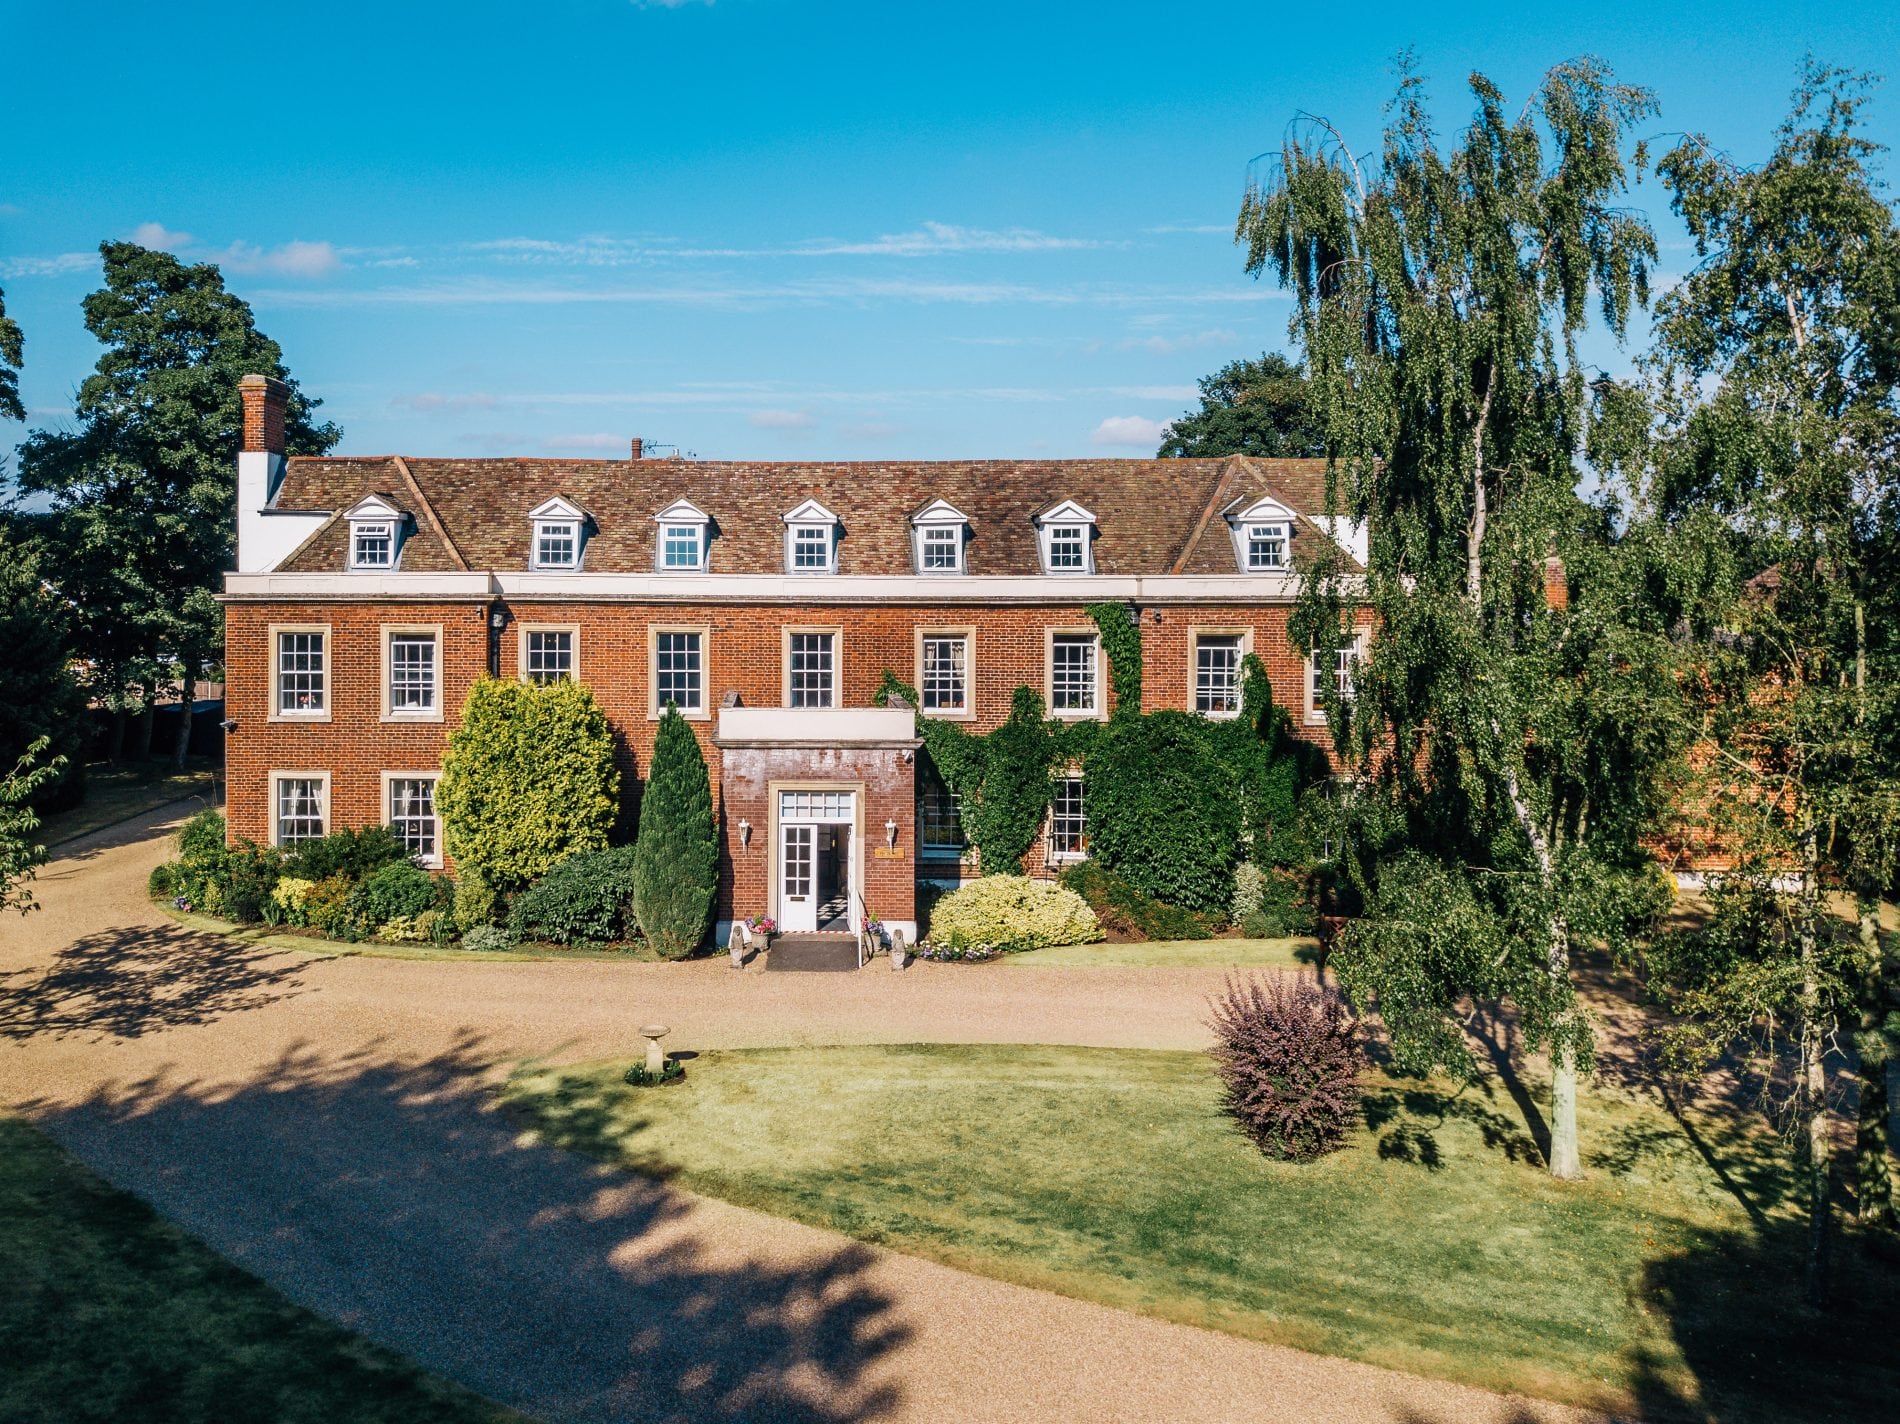 Paxton Hall is rated Good in All five domains by the CQC